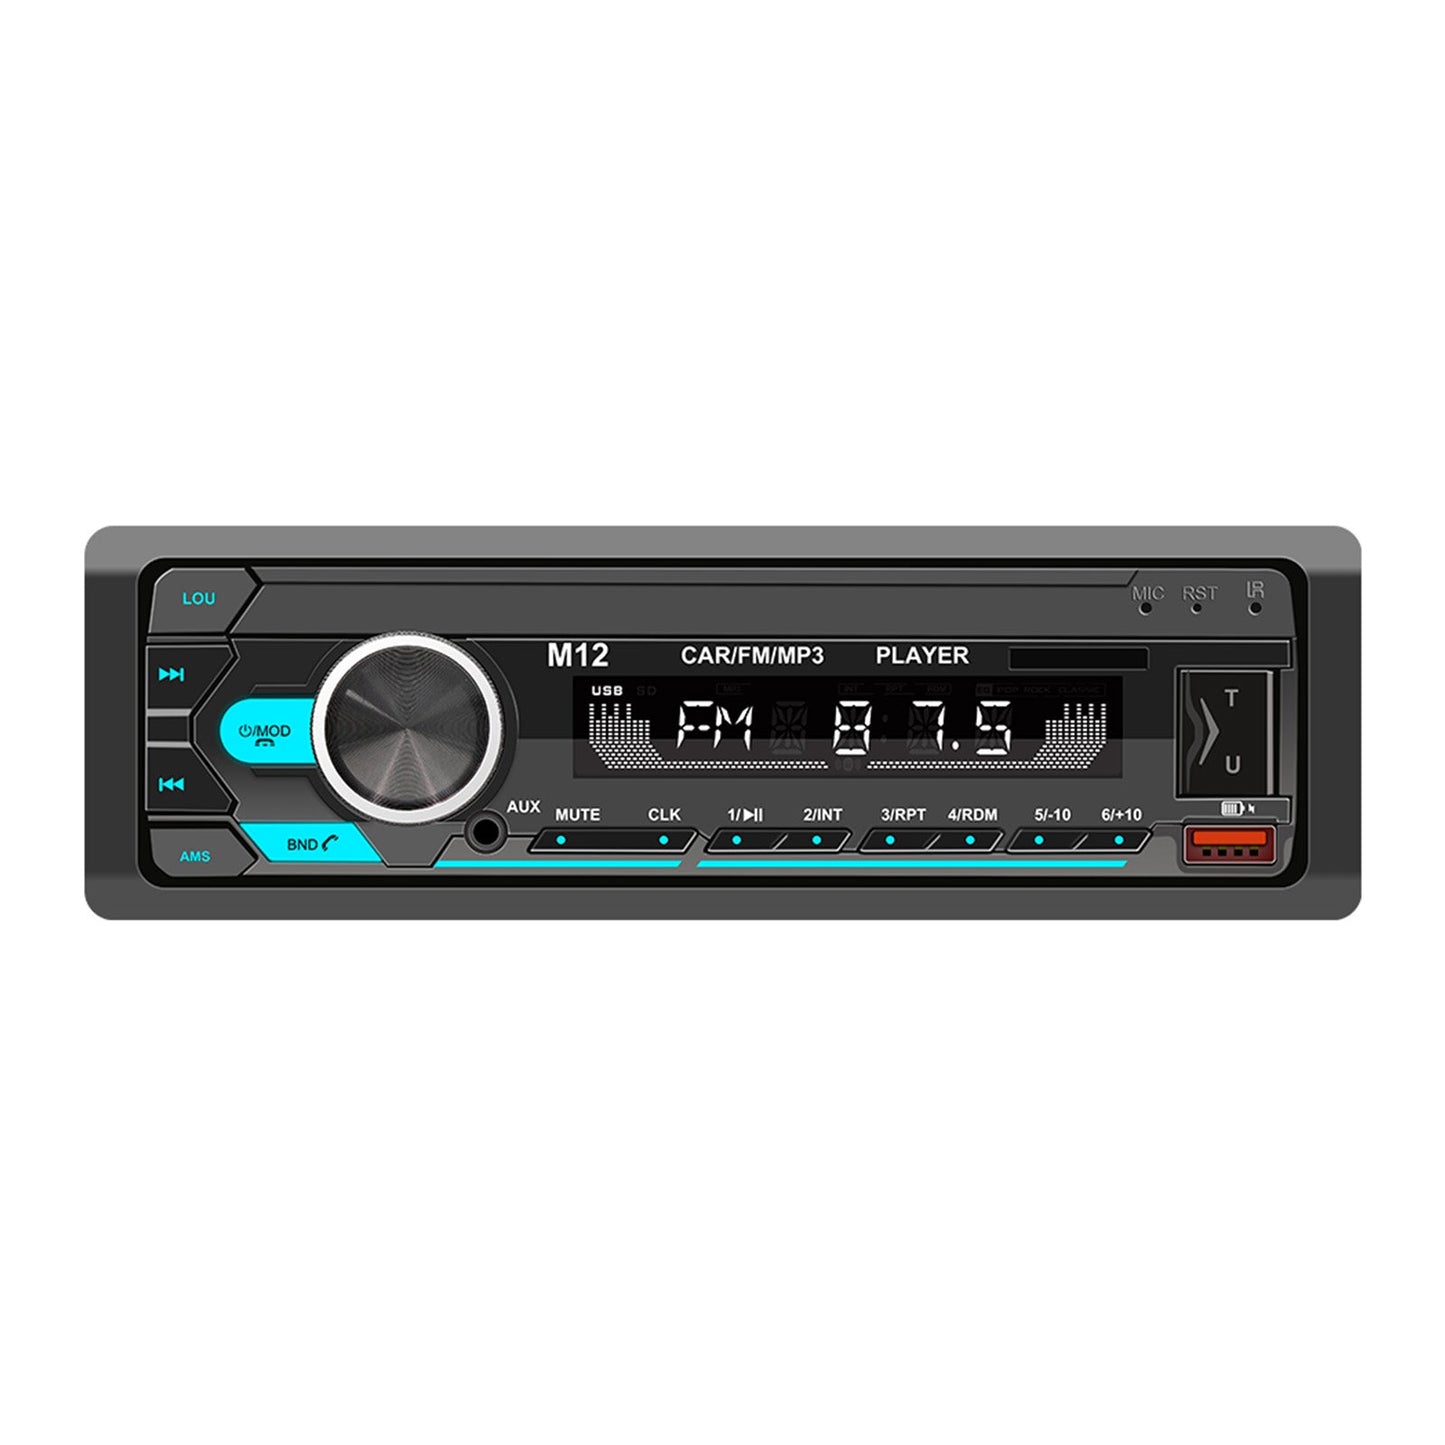 AI smart Bluetooth Stereo Radio FM Car MP3 Player Positioning to Find a Car